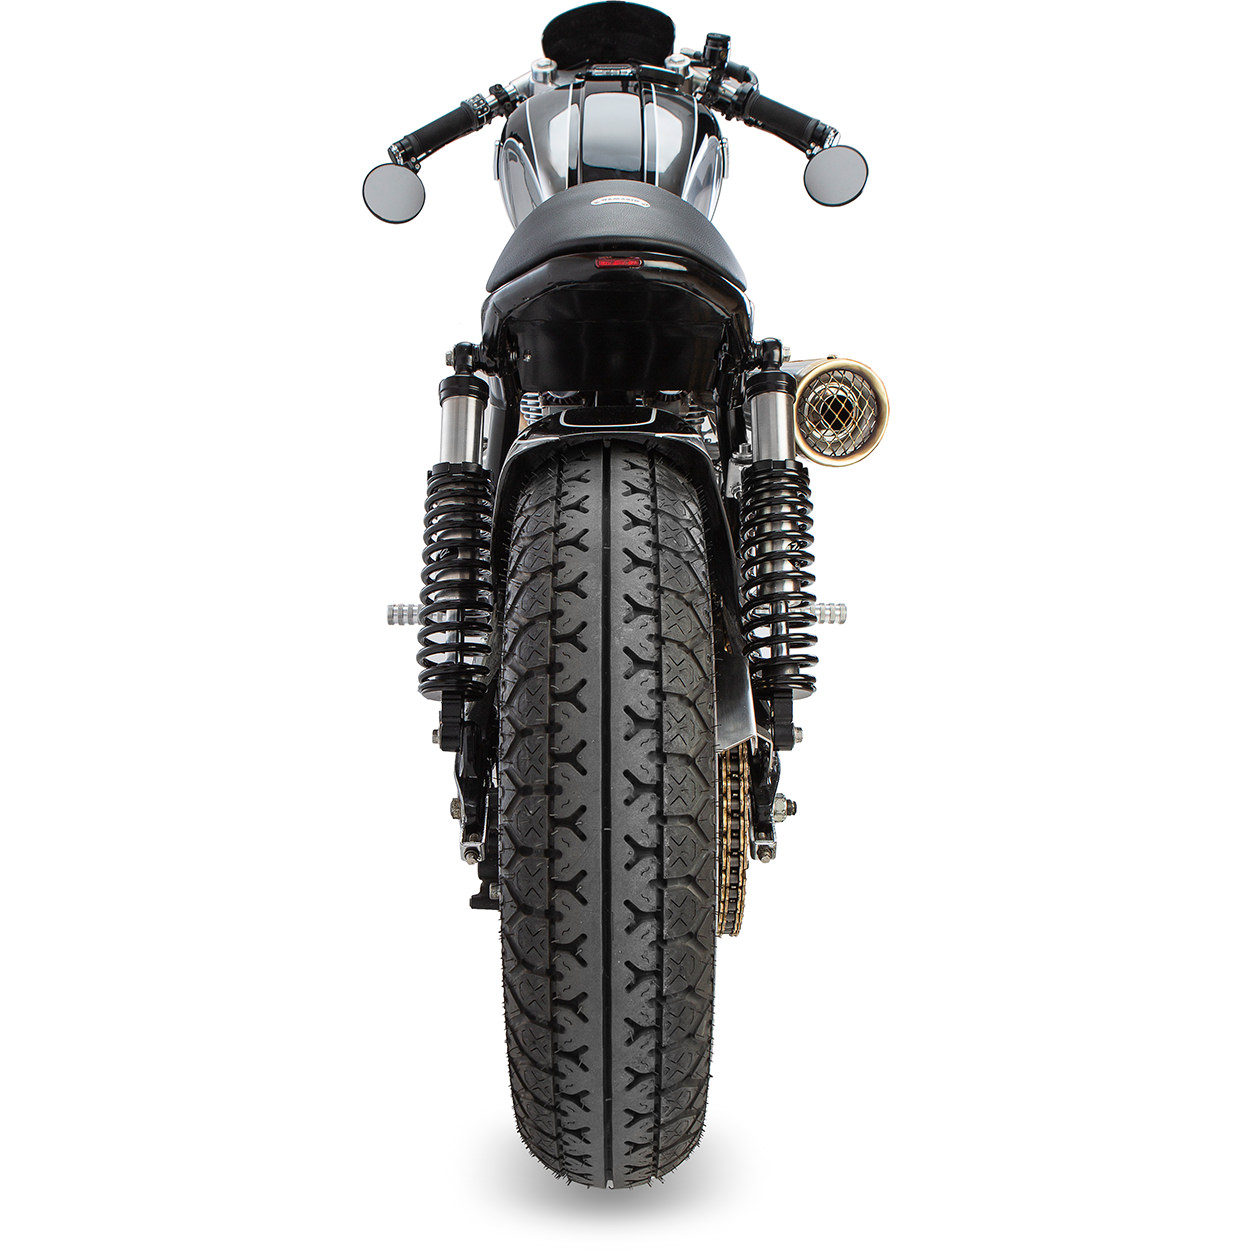 Rent or win this Triumph Bonneville cafe racer from Tamarit